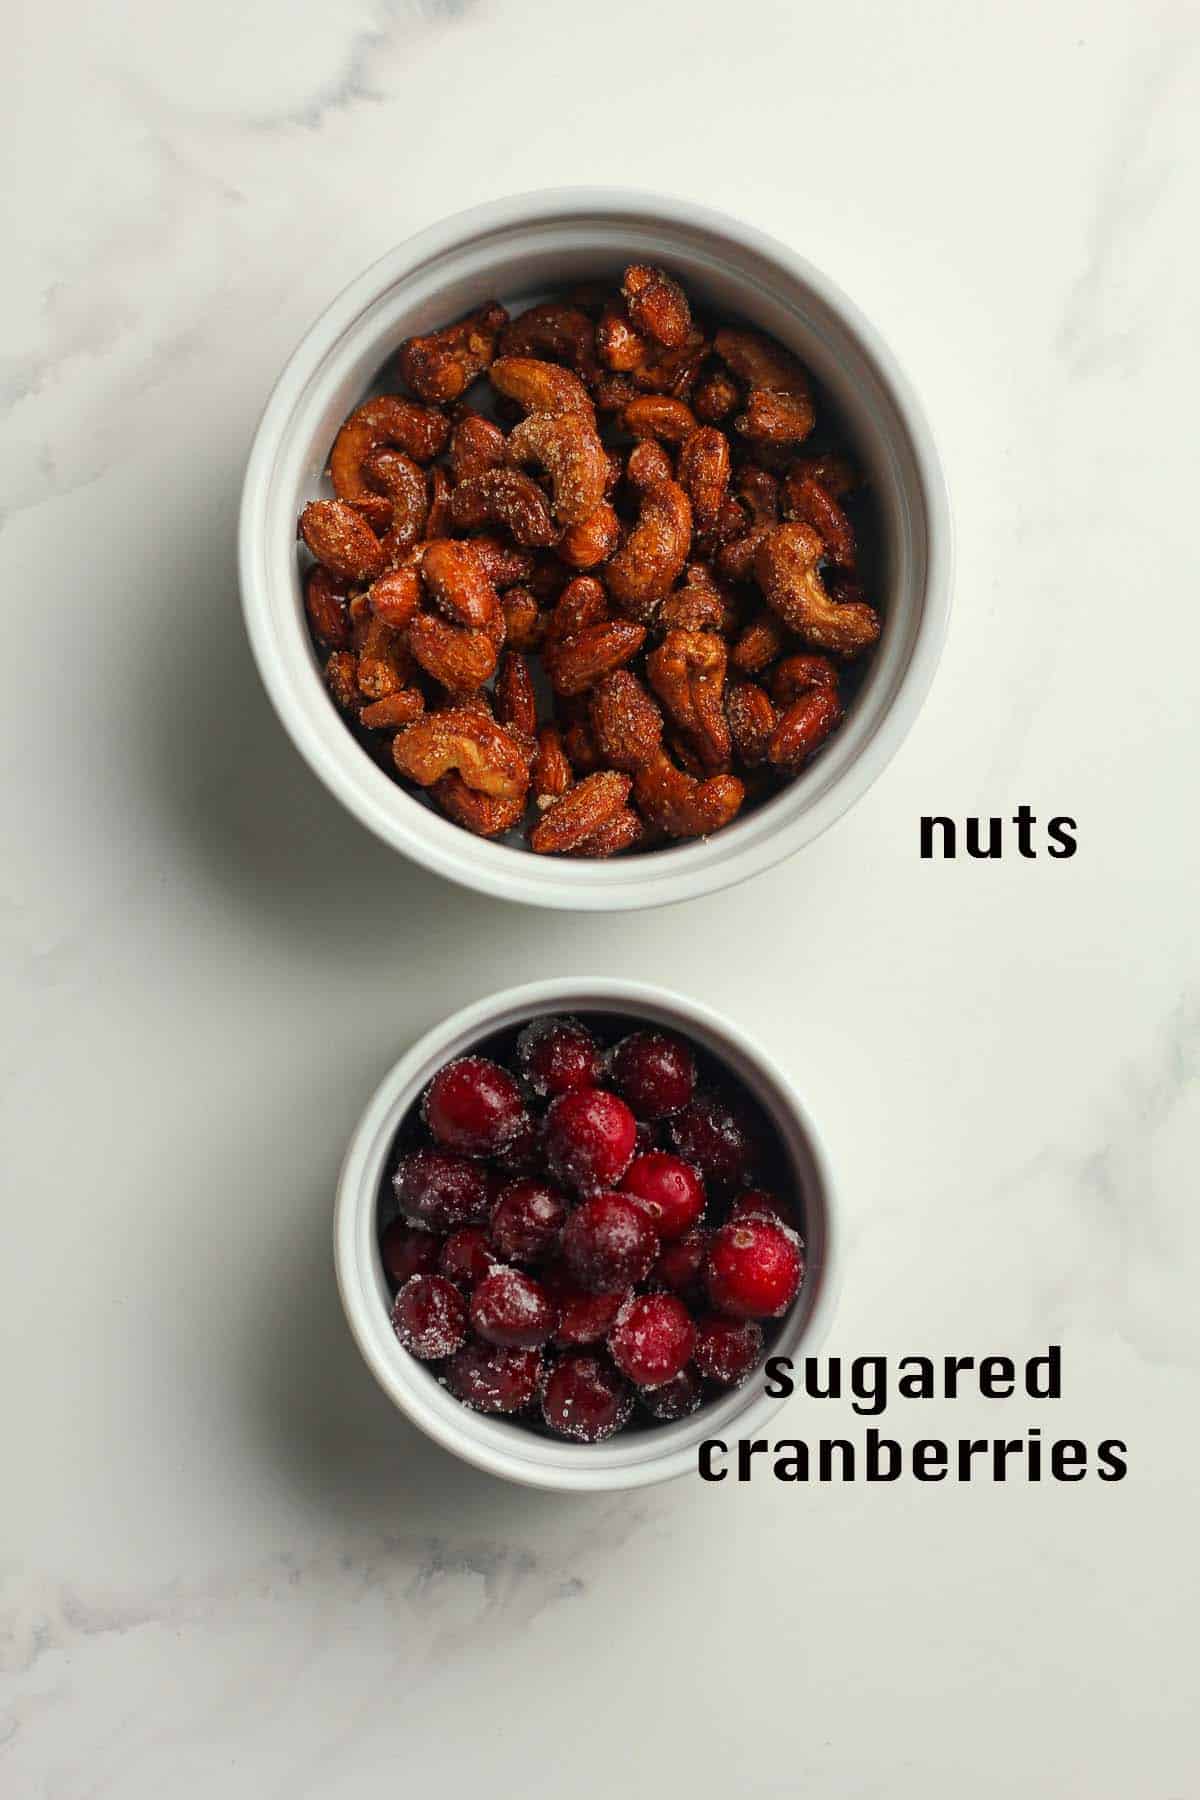 Bowls of honey roasted nuts plus sugared cranberries.